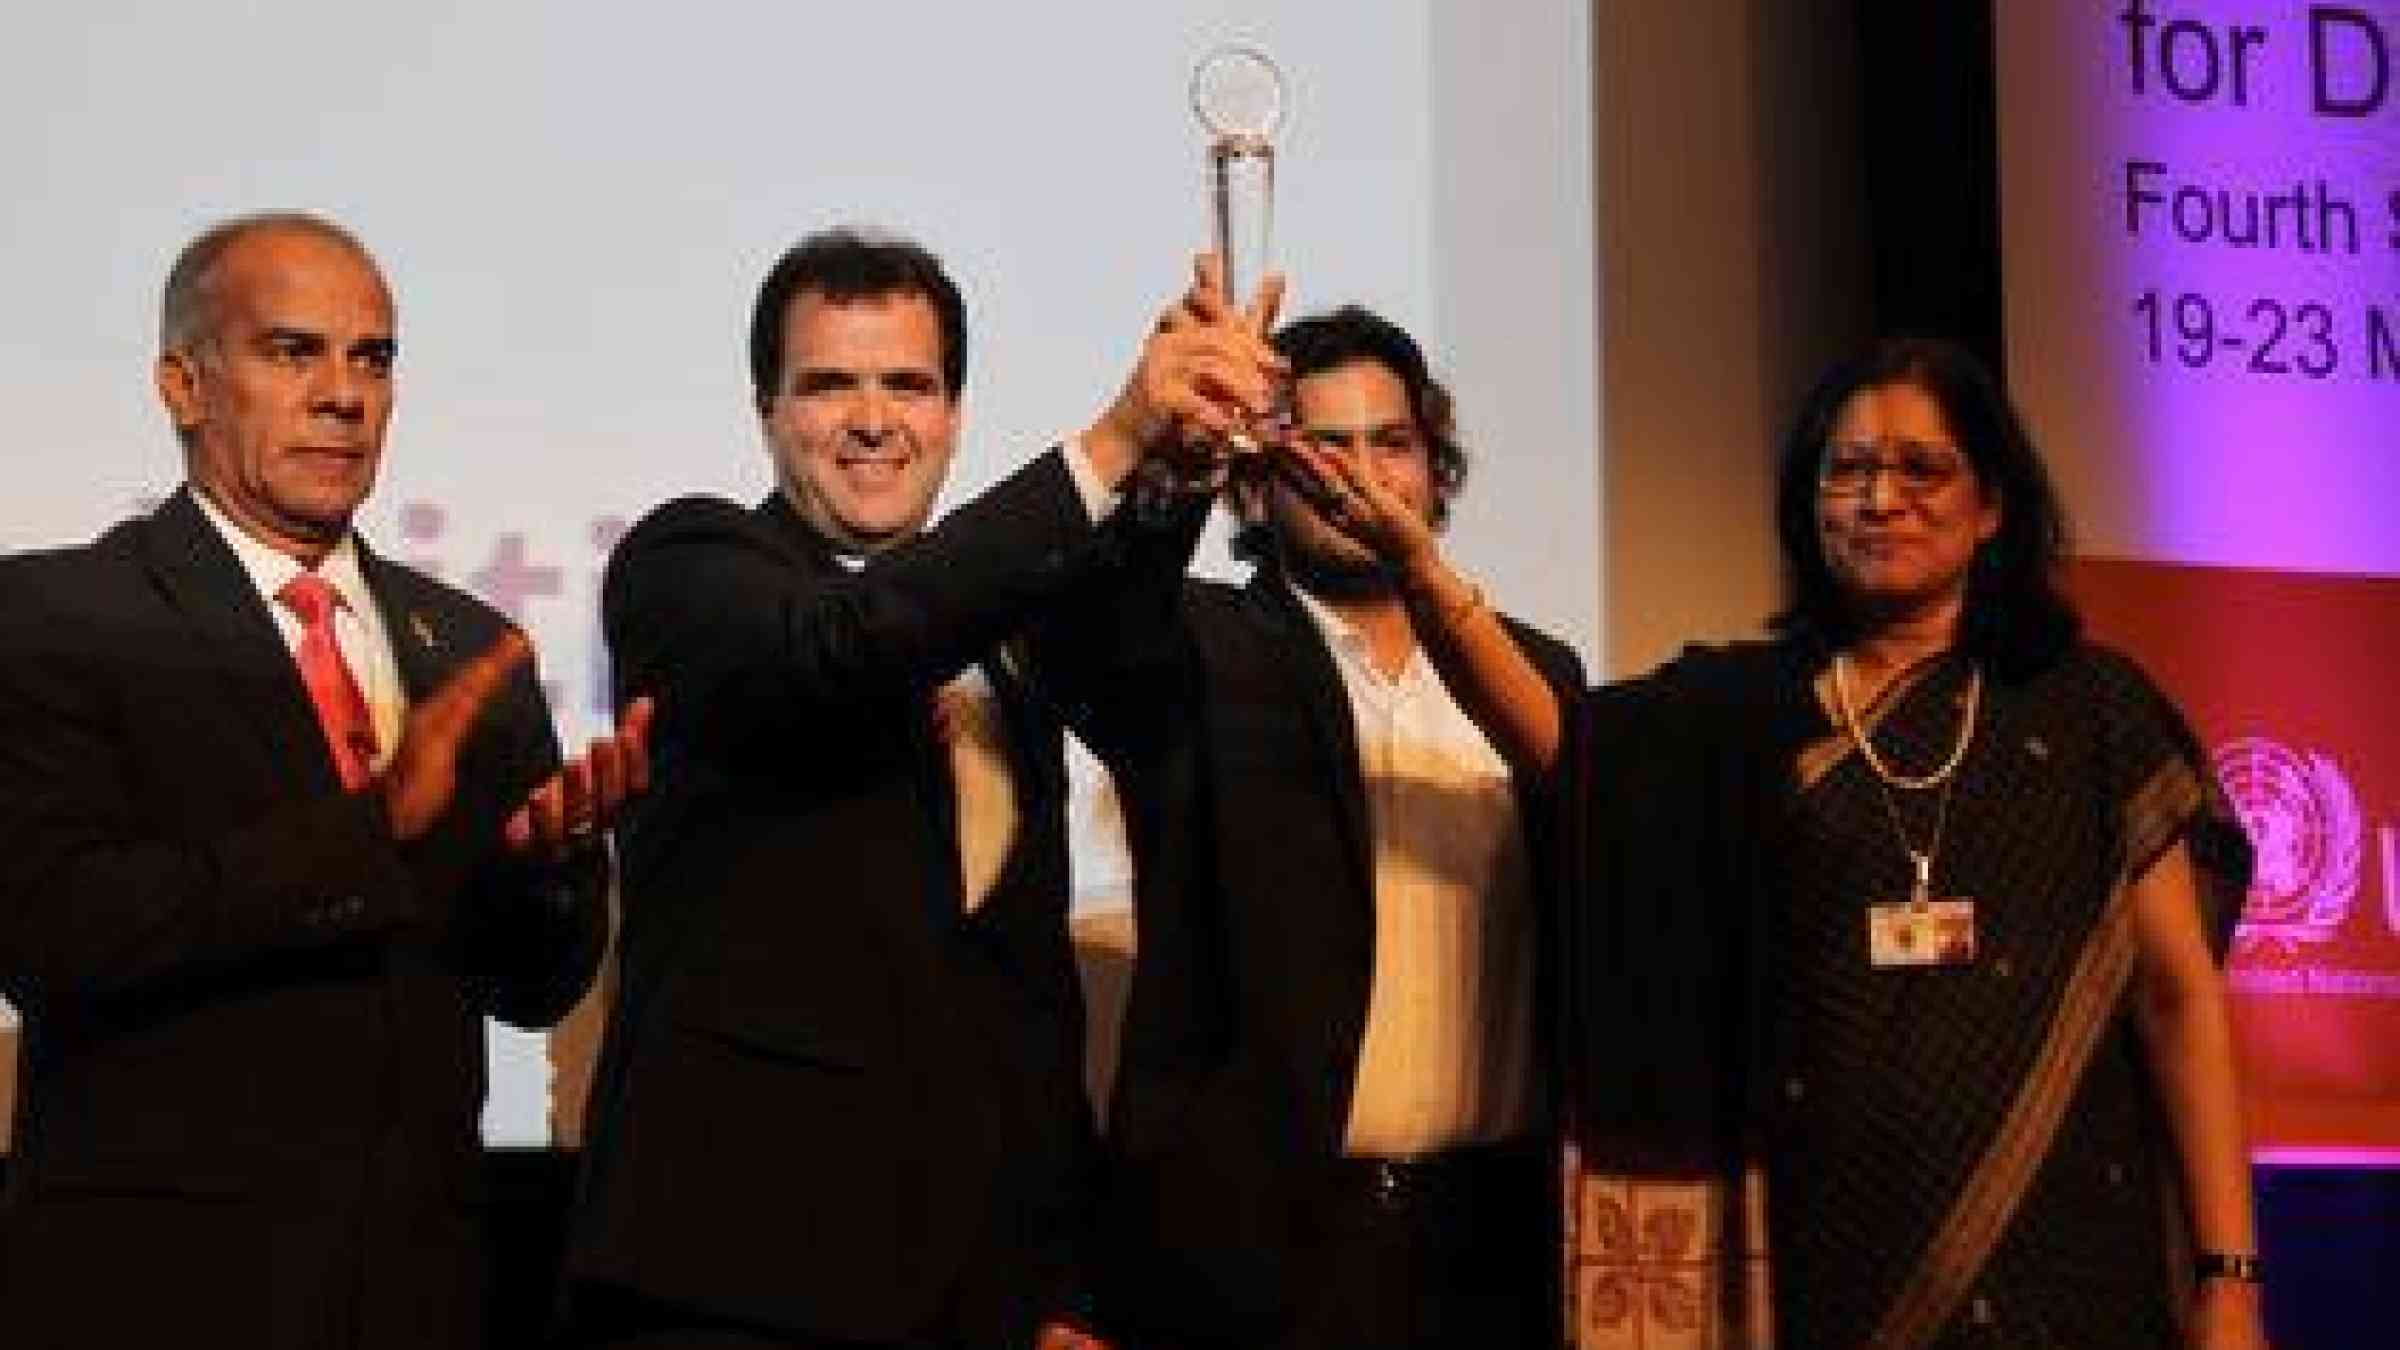 Last year's Sasakawa Award was shared between Belo Horizonte, the capital of Minas Gerais State, Brazil, and the National Alliance for Risk Reduction and Response Initiative (NARRI) from Bangladesh. (Photo: UNISDR)